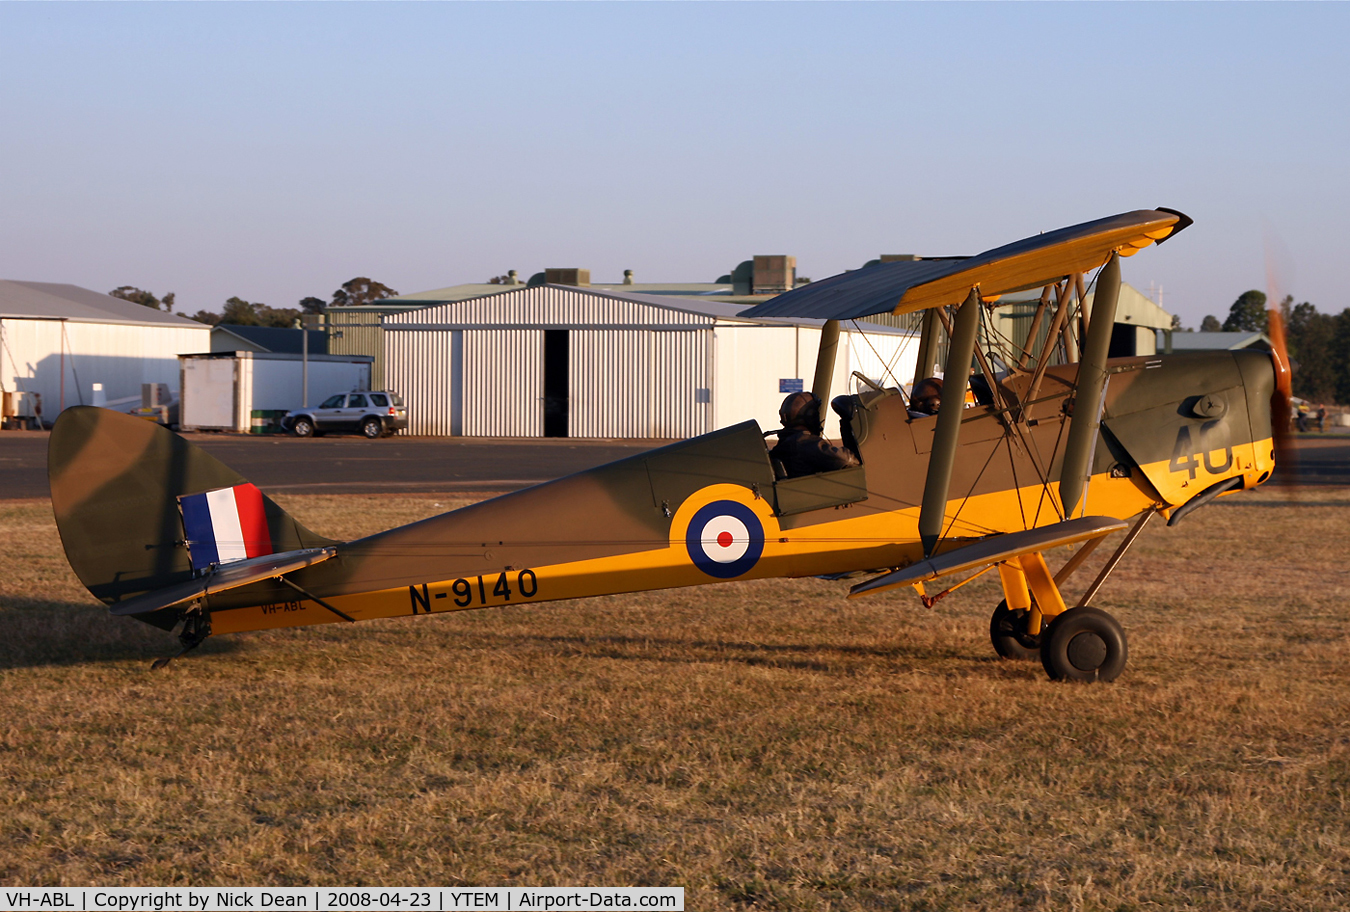 VH-ABL, 1939 De Havilland DH-82A Tiger Moth II C/N 82259, C/N 82259 not as mistakenly posted